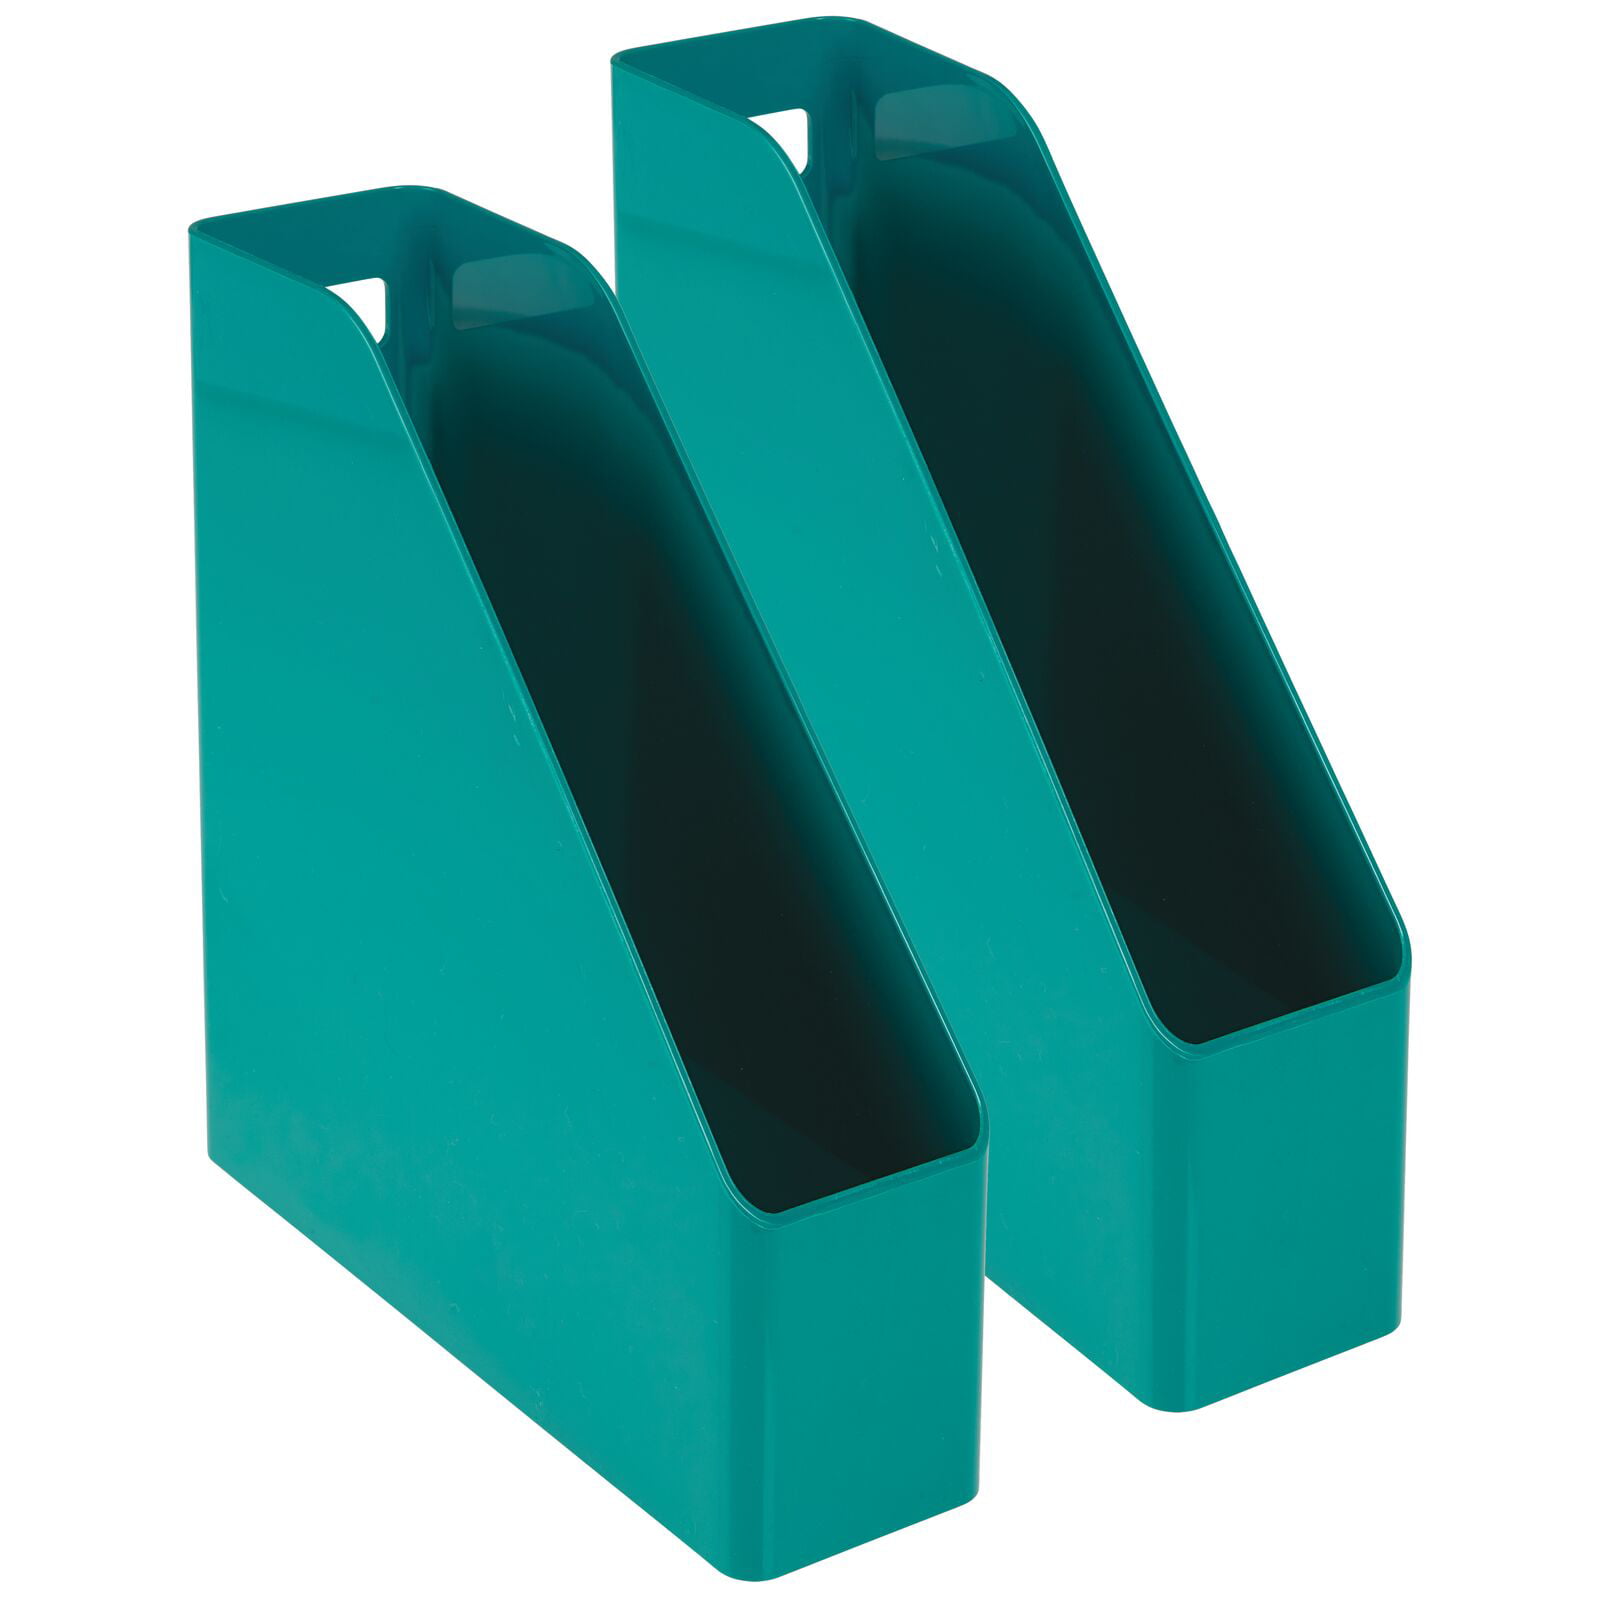 Vertical with Handle Teal Blue Magazines Container for Home Office and Work Desktops 8 Pack mDesign Plastic File Folder Bin Storage Organizer Envelopes Binders Holds Notebooks 